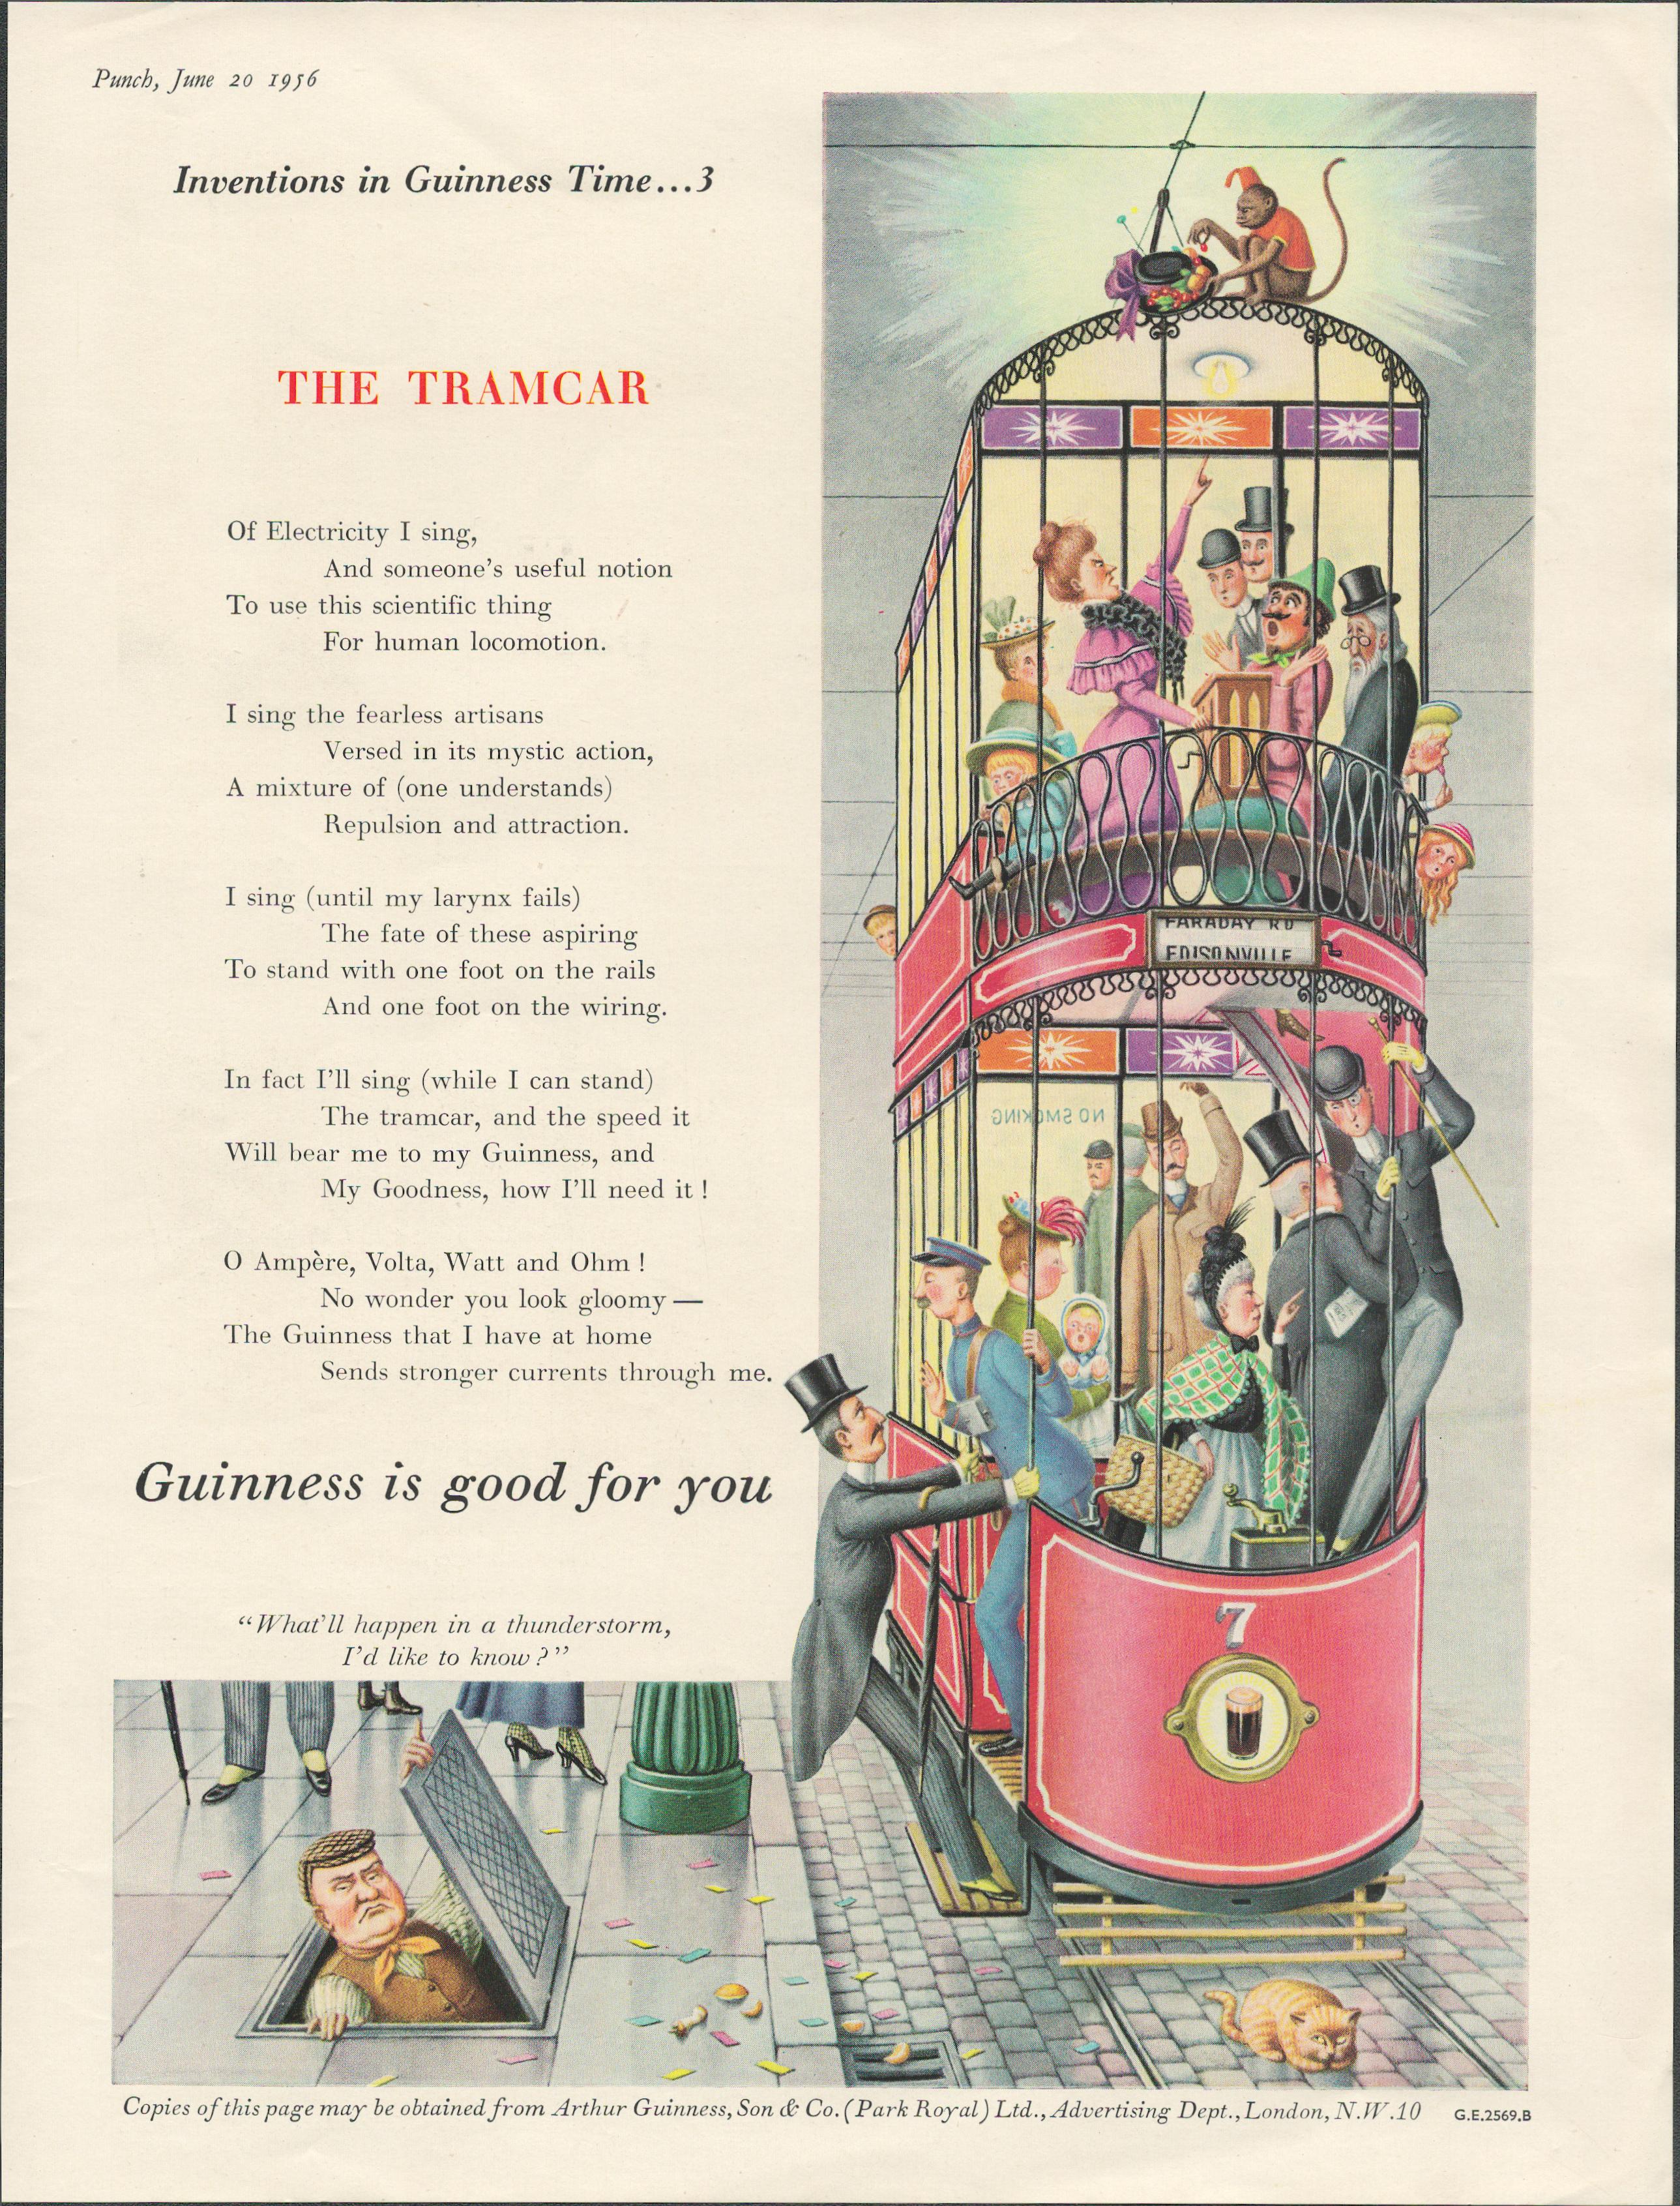 1956 Vintage Guinness Print –Inventions-The Tramcar” GE 2569.B